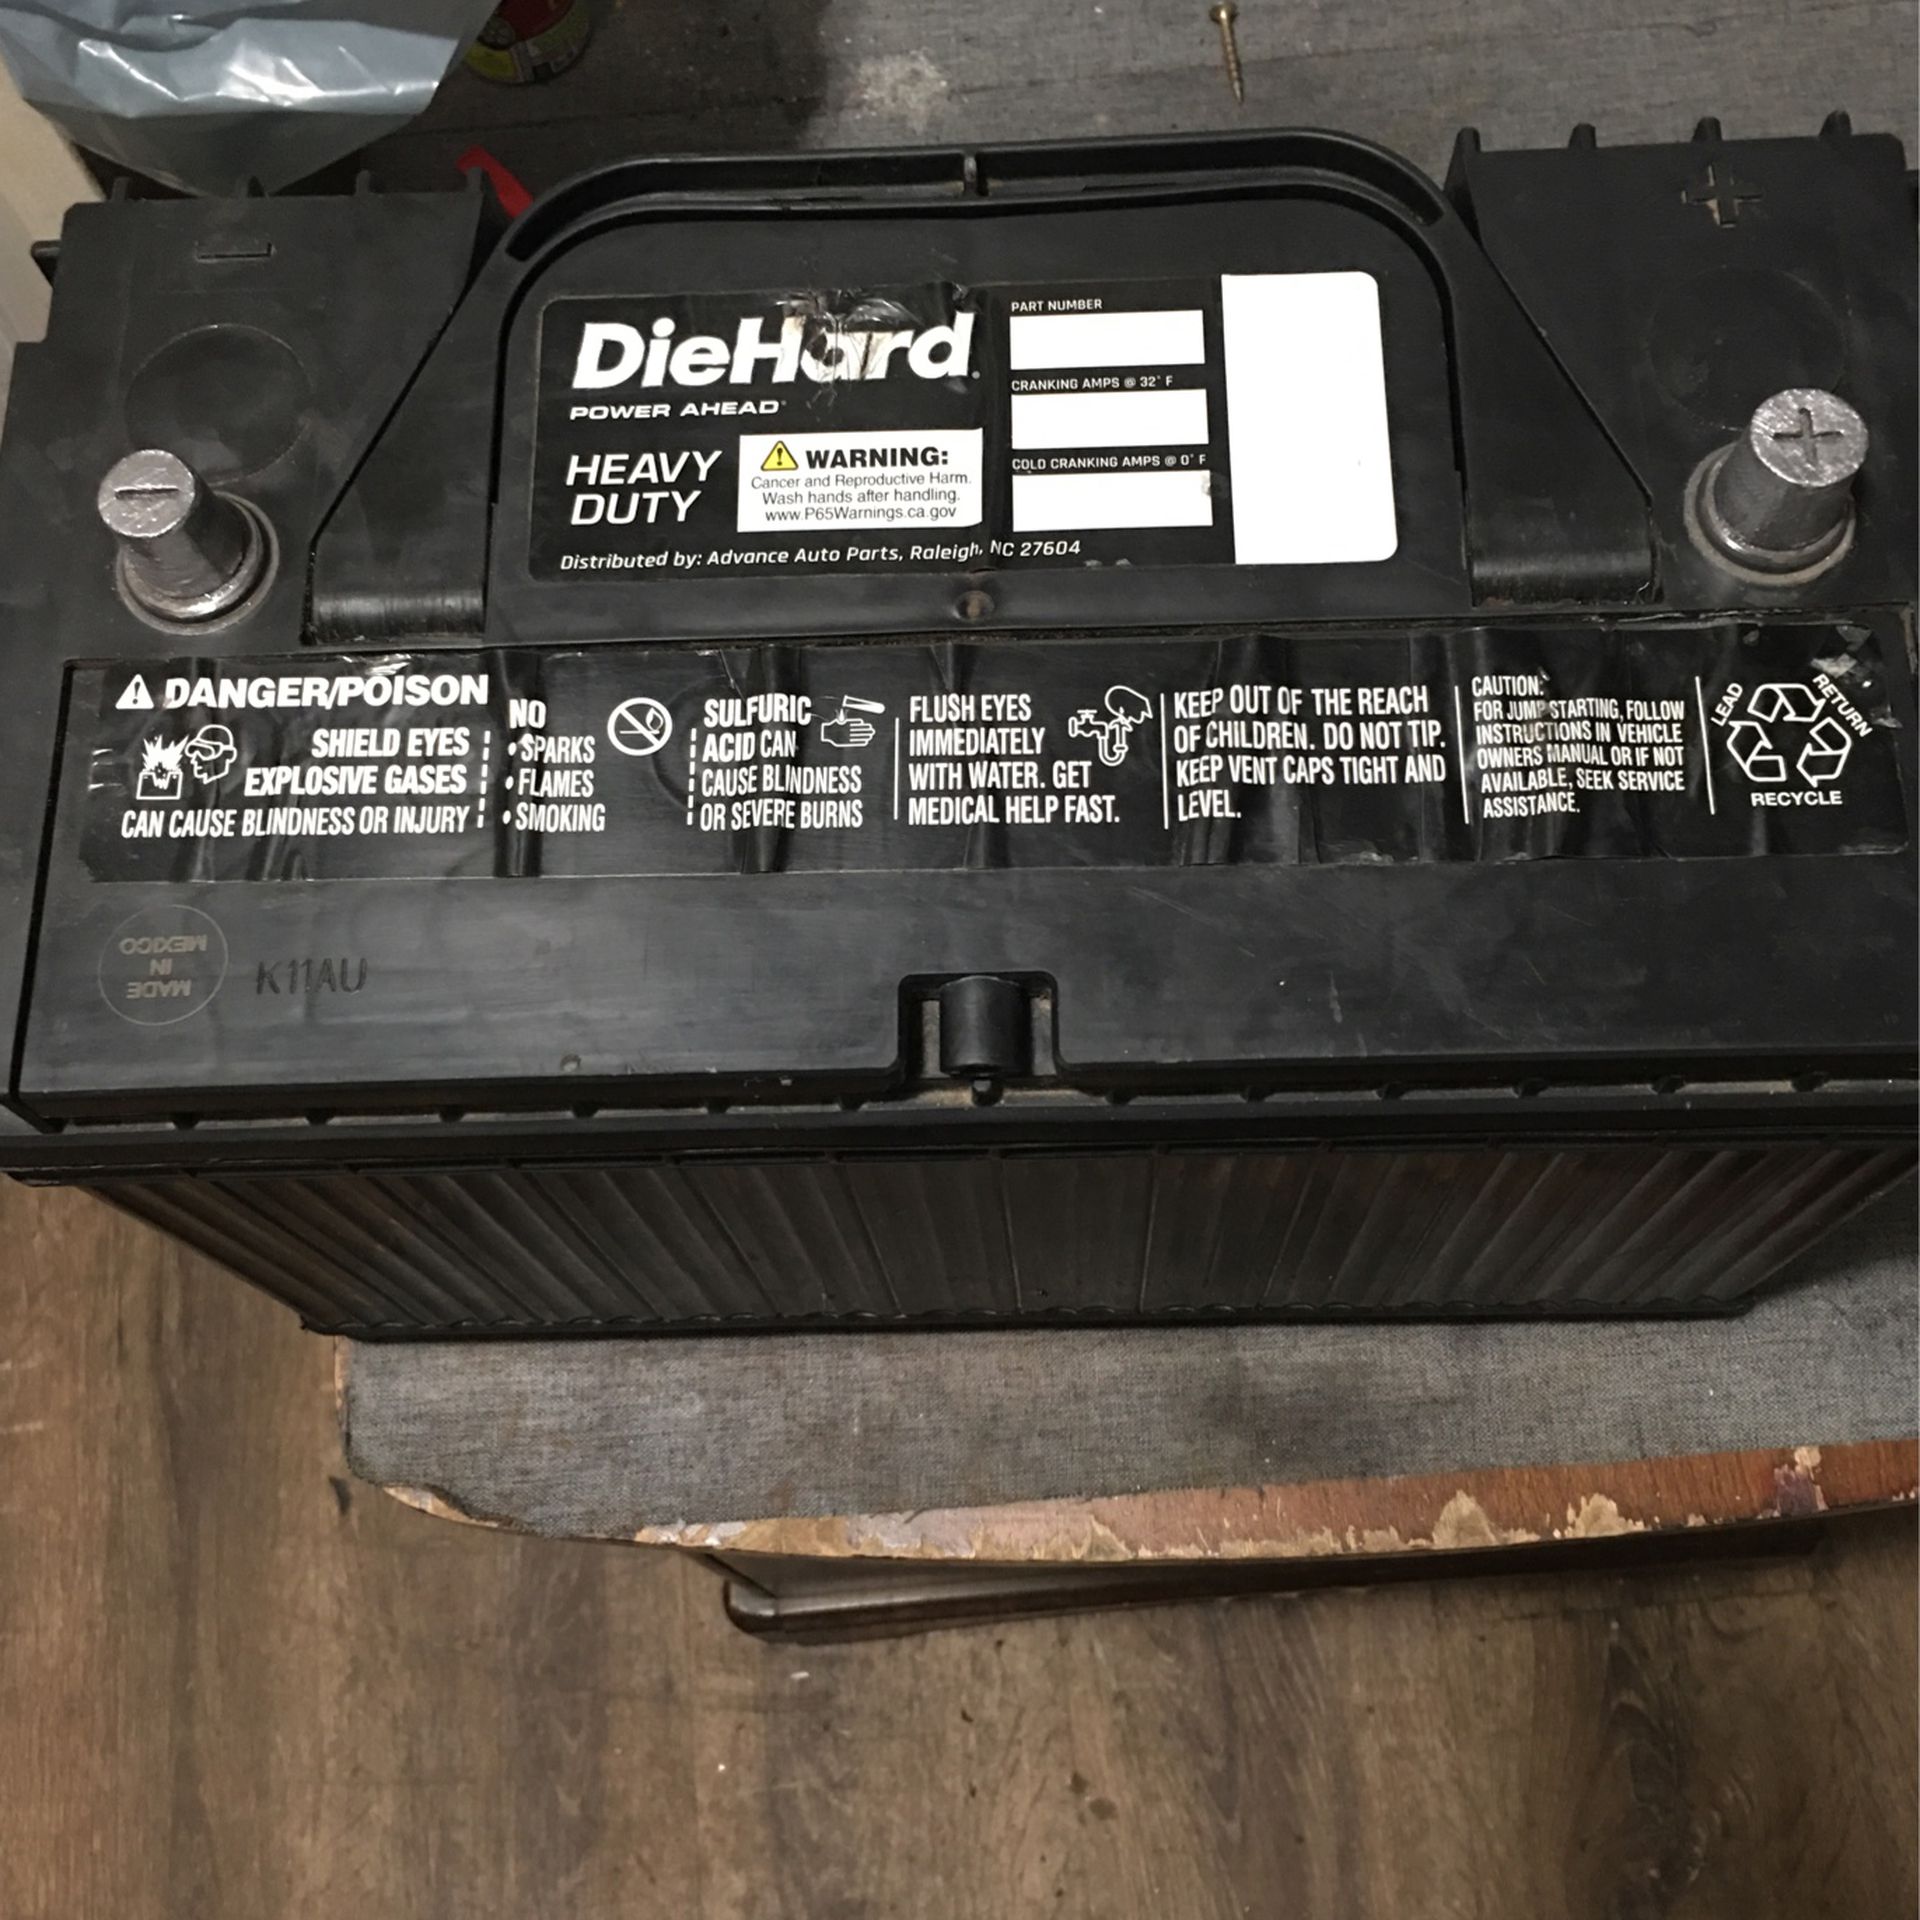 COME GET THIS DIE HARD HEAVY DUTY BATTERY 950 COLD CRANKY AMPS FOR $60 Or GO PAY OVER $200 FOR A NEW ONE